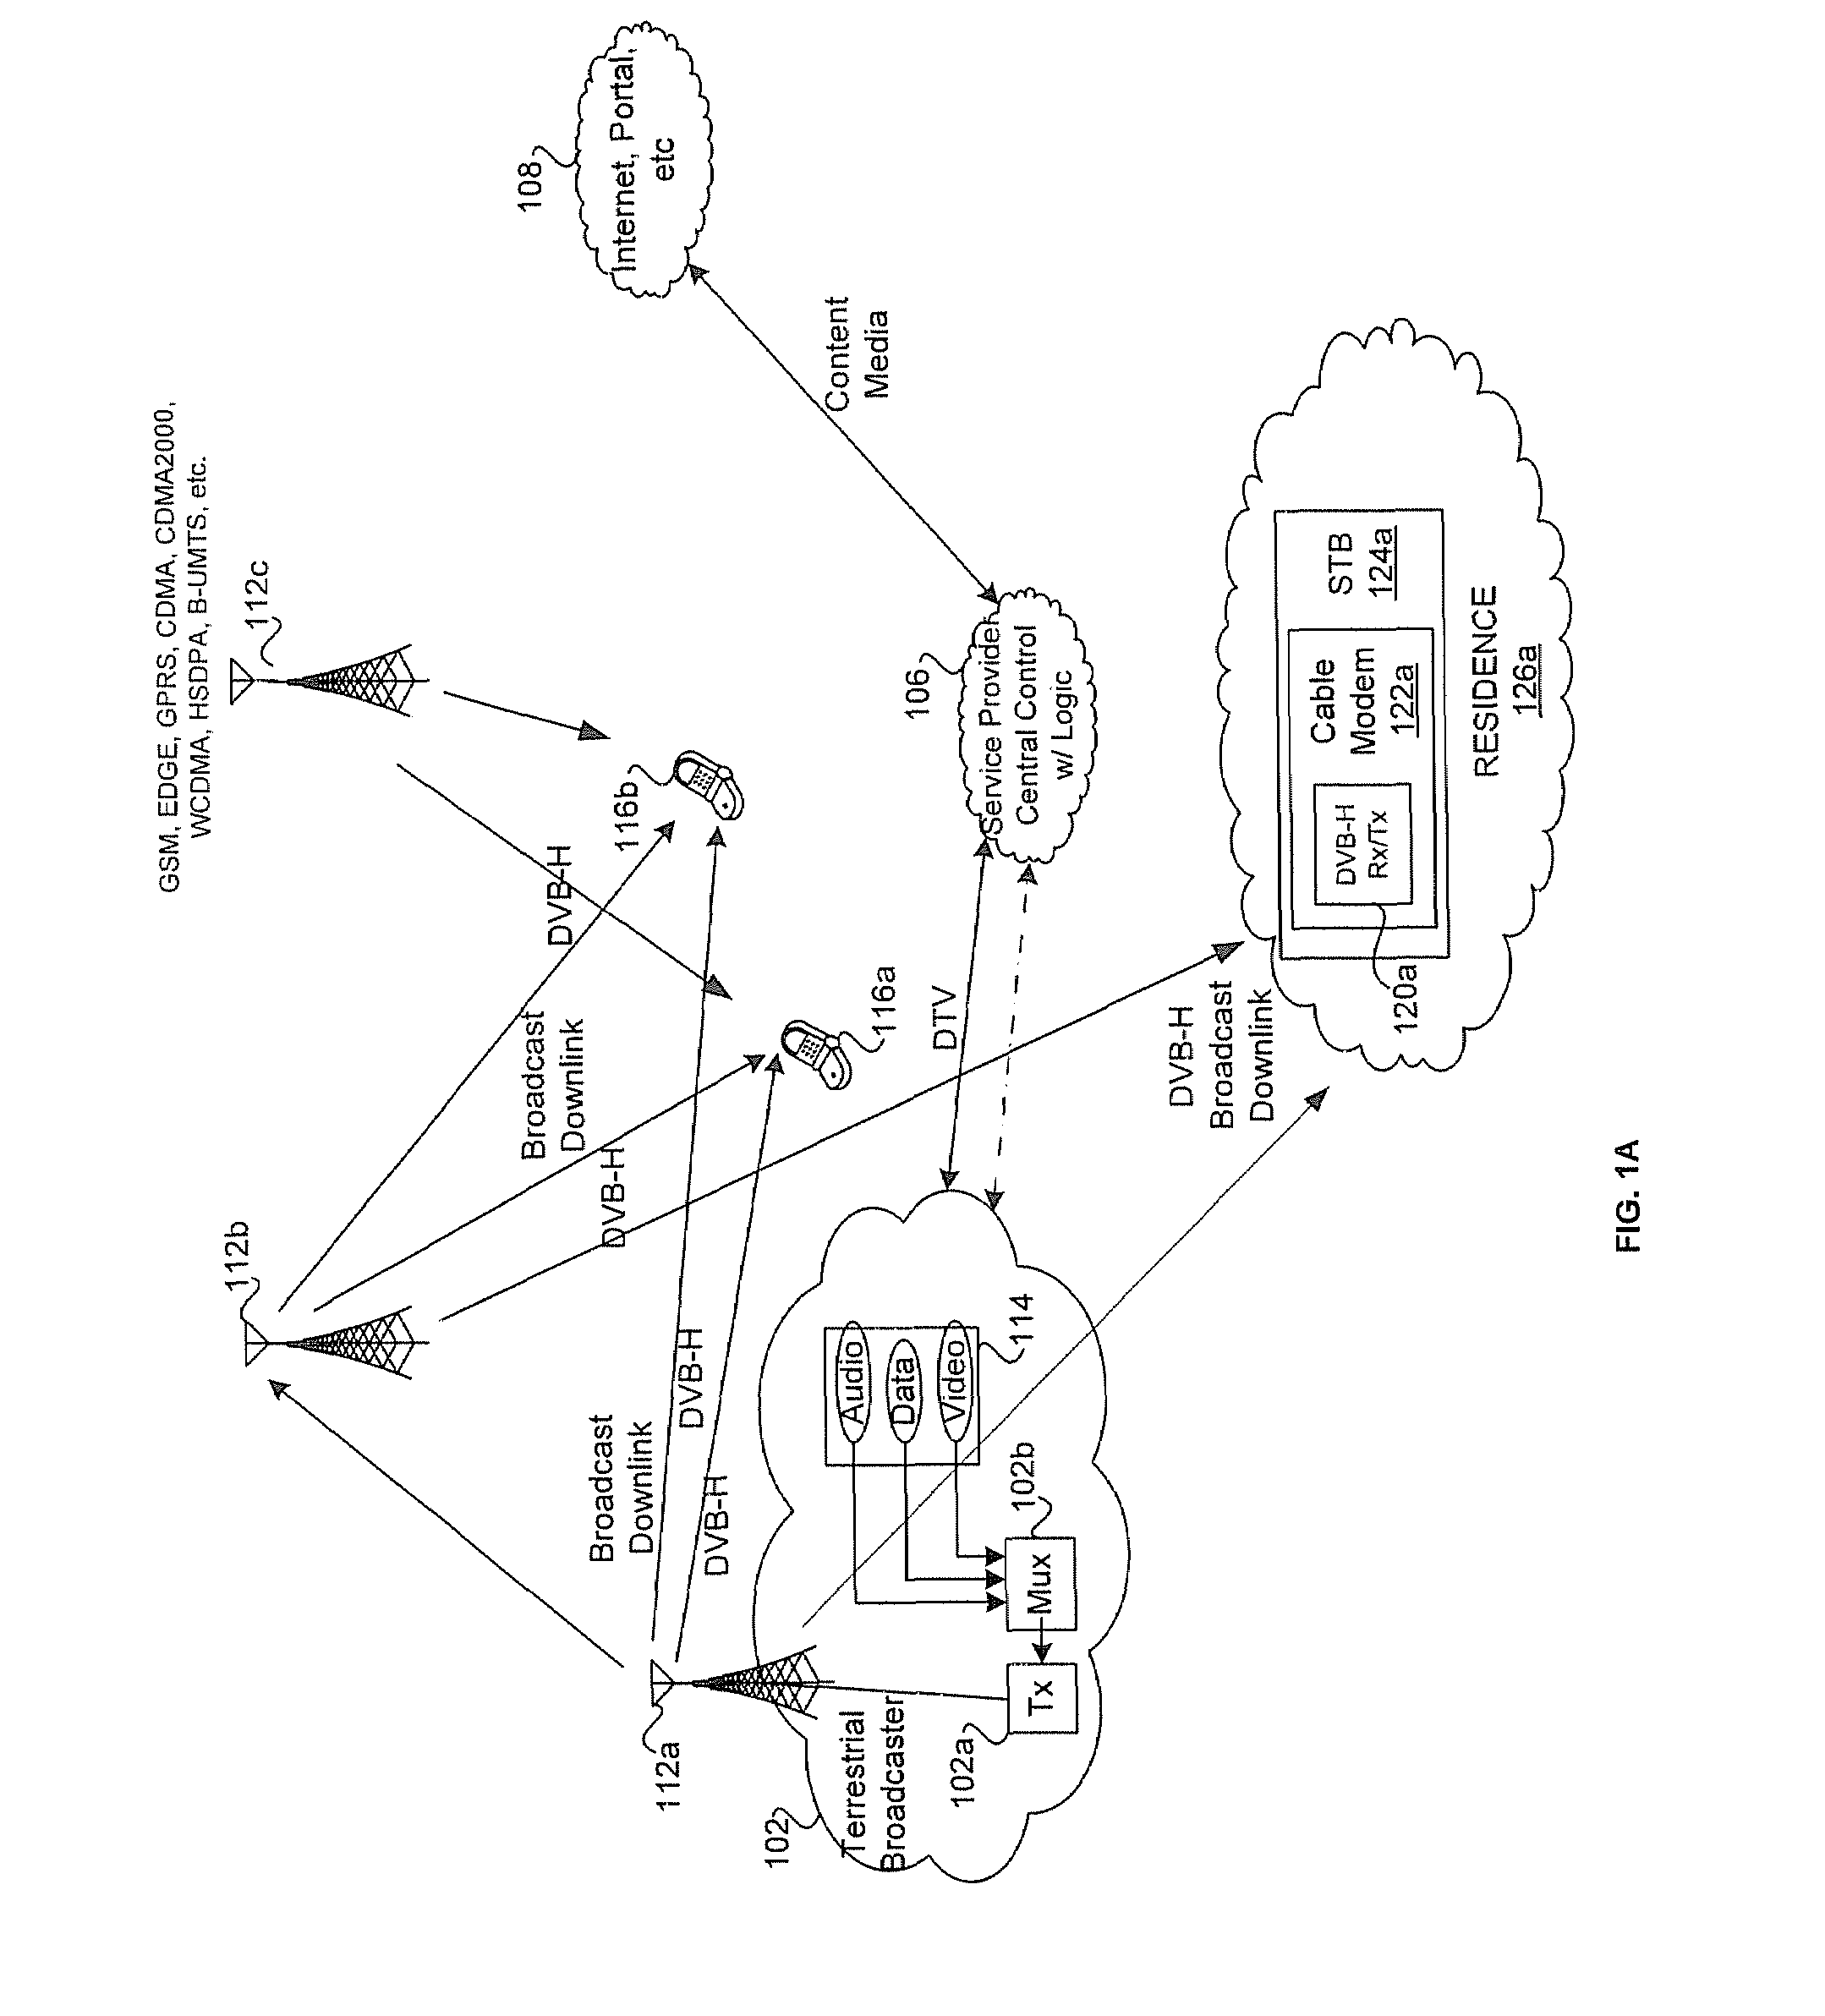 Method And System For Integrated Cable Modem And DVB-H Receiver And/Or Transmitter